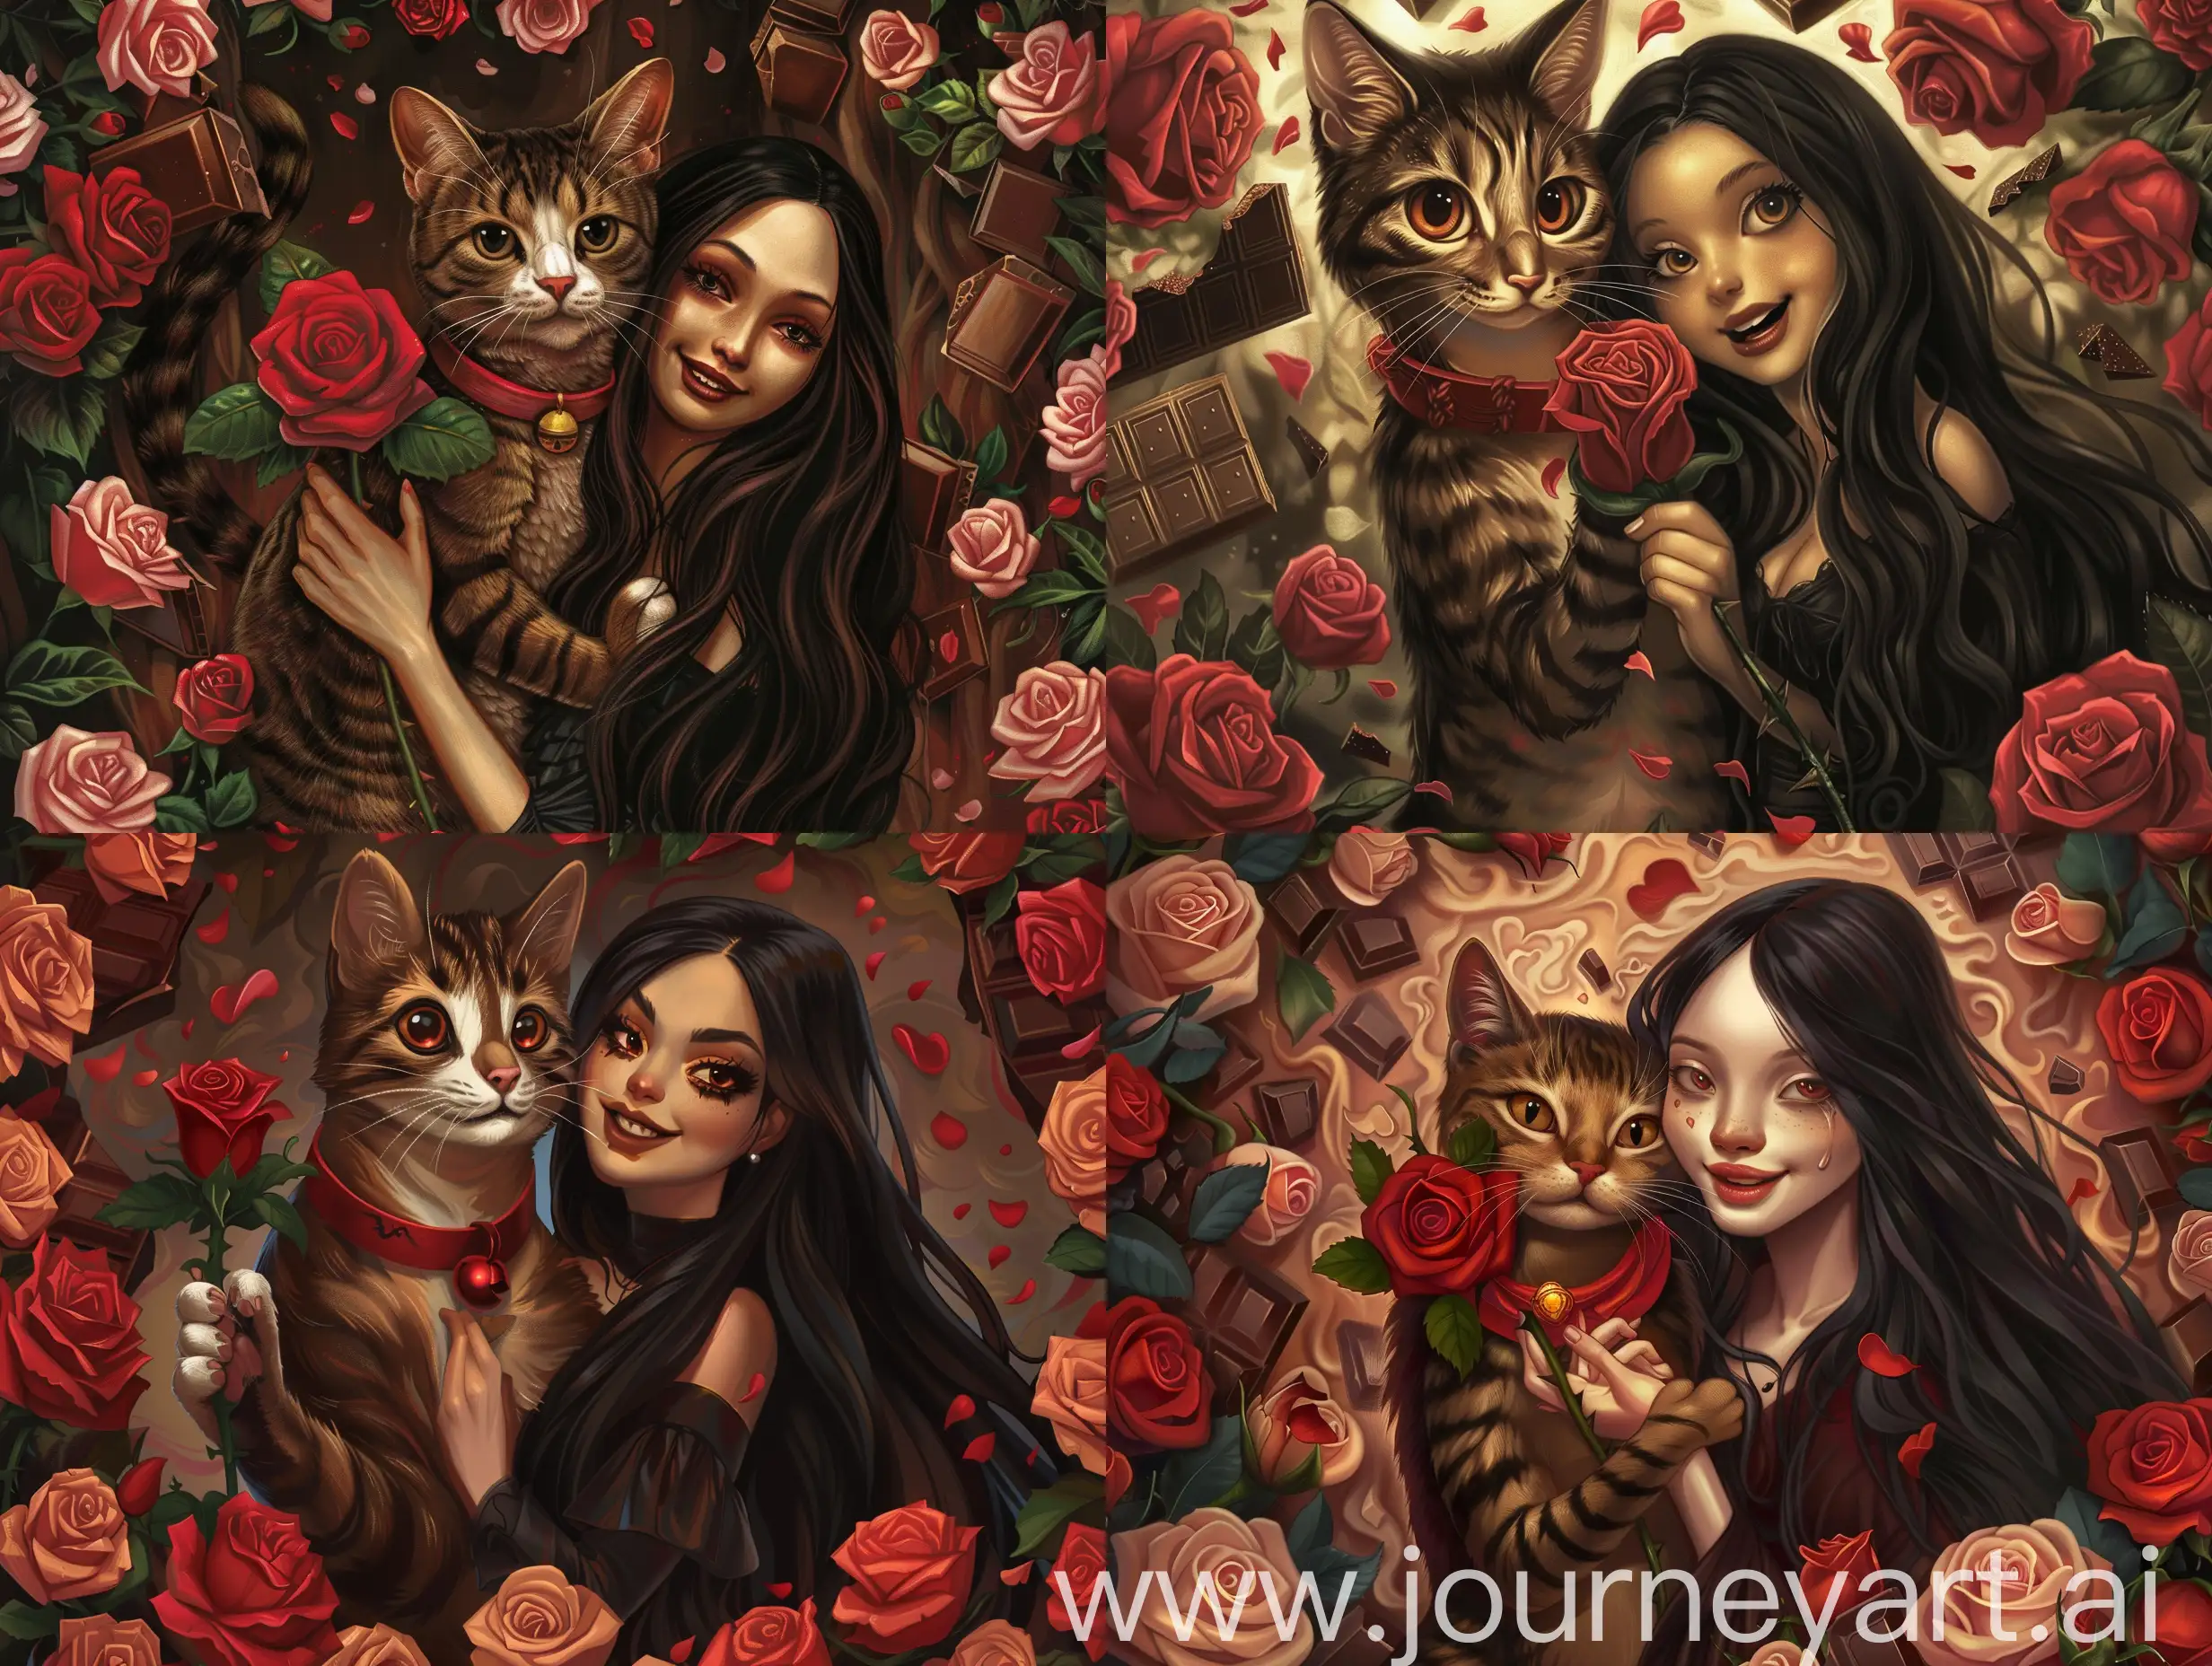 A tabby cat with a red rose around his neck, his hand holding a rose, is standing with a woman with long black hair. The woman has a happy face. And the two of them were standing and hugging each other. There is a background of roses and chocolate.